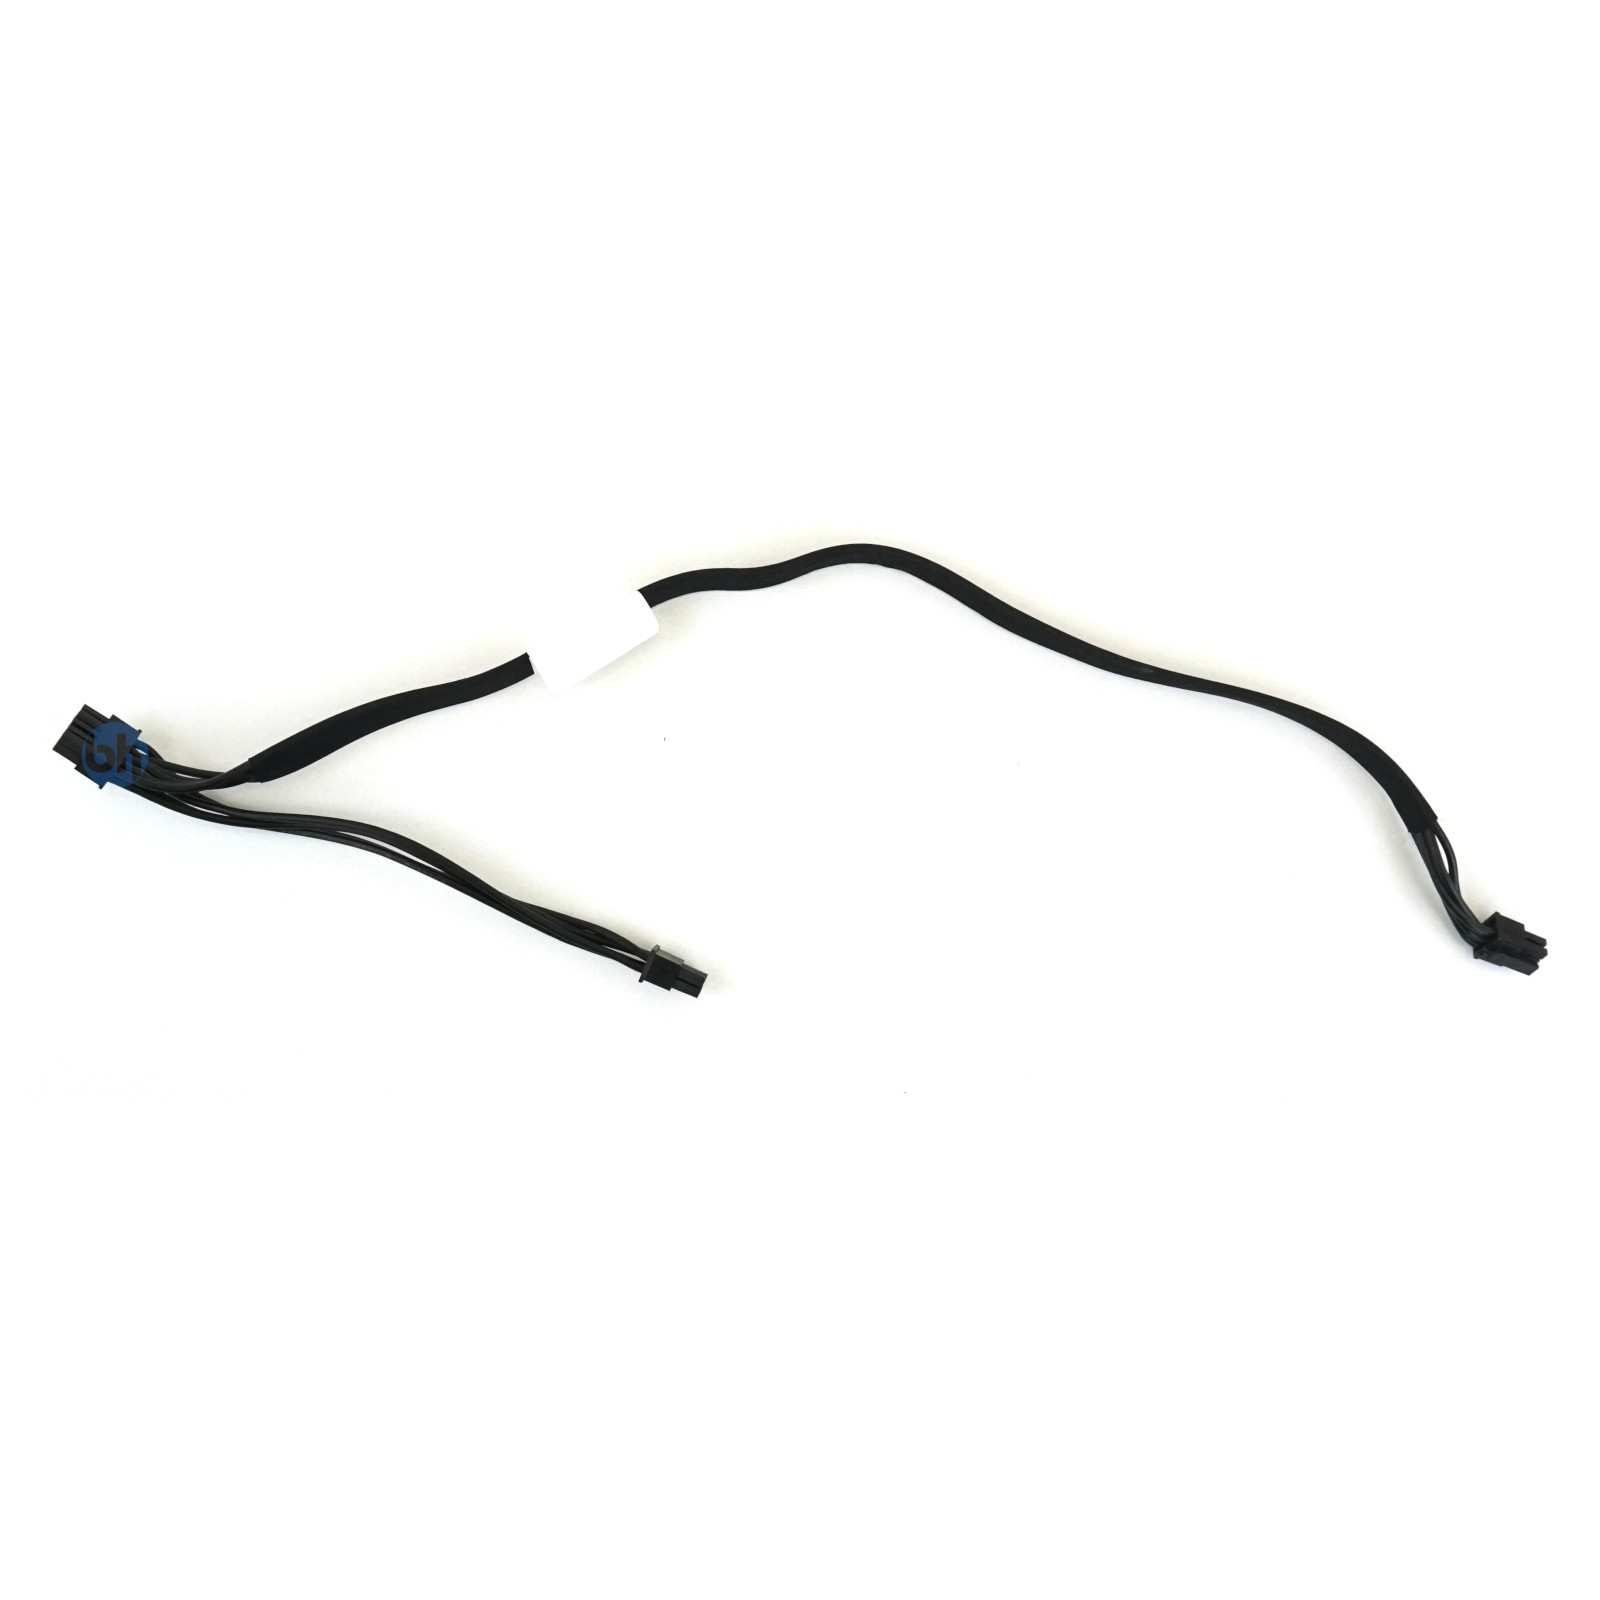 HP 747569-001 ProLiant DL380 Gen9 Front and Rear Backplane Power Cable 20in